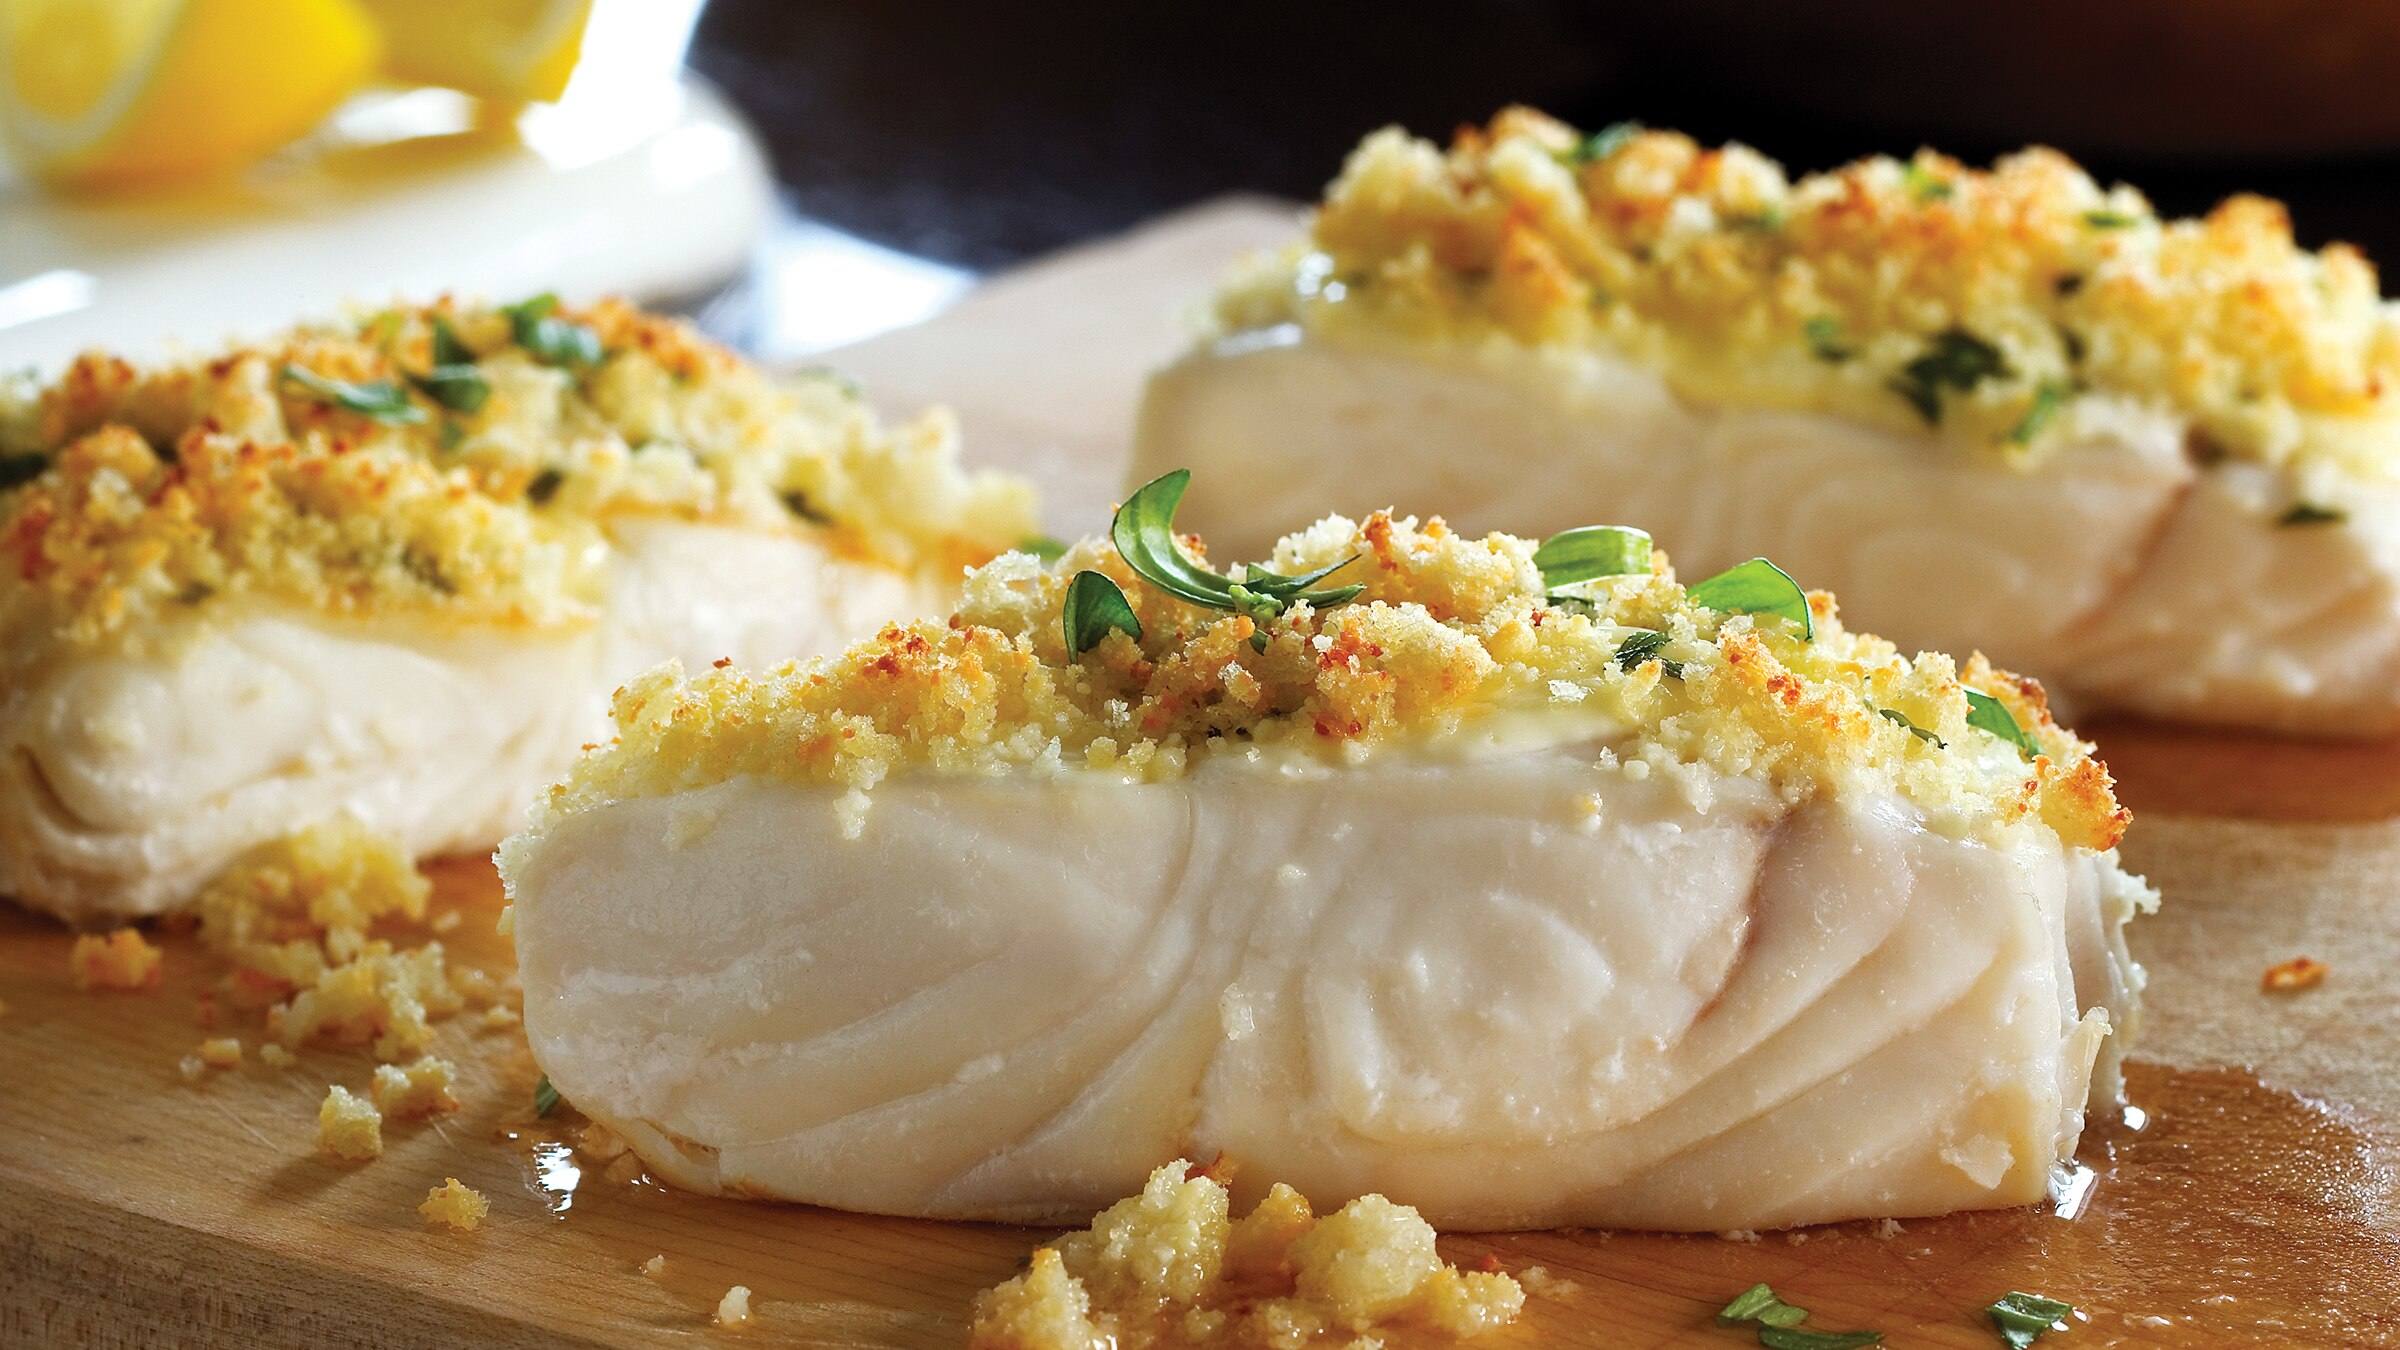 Grilled Halibut with Lemon-Herb Crust